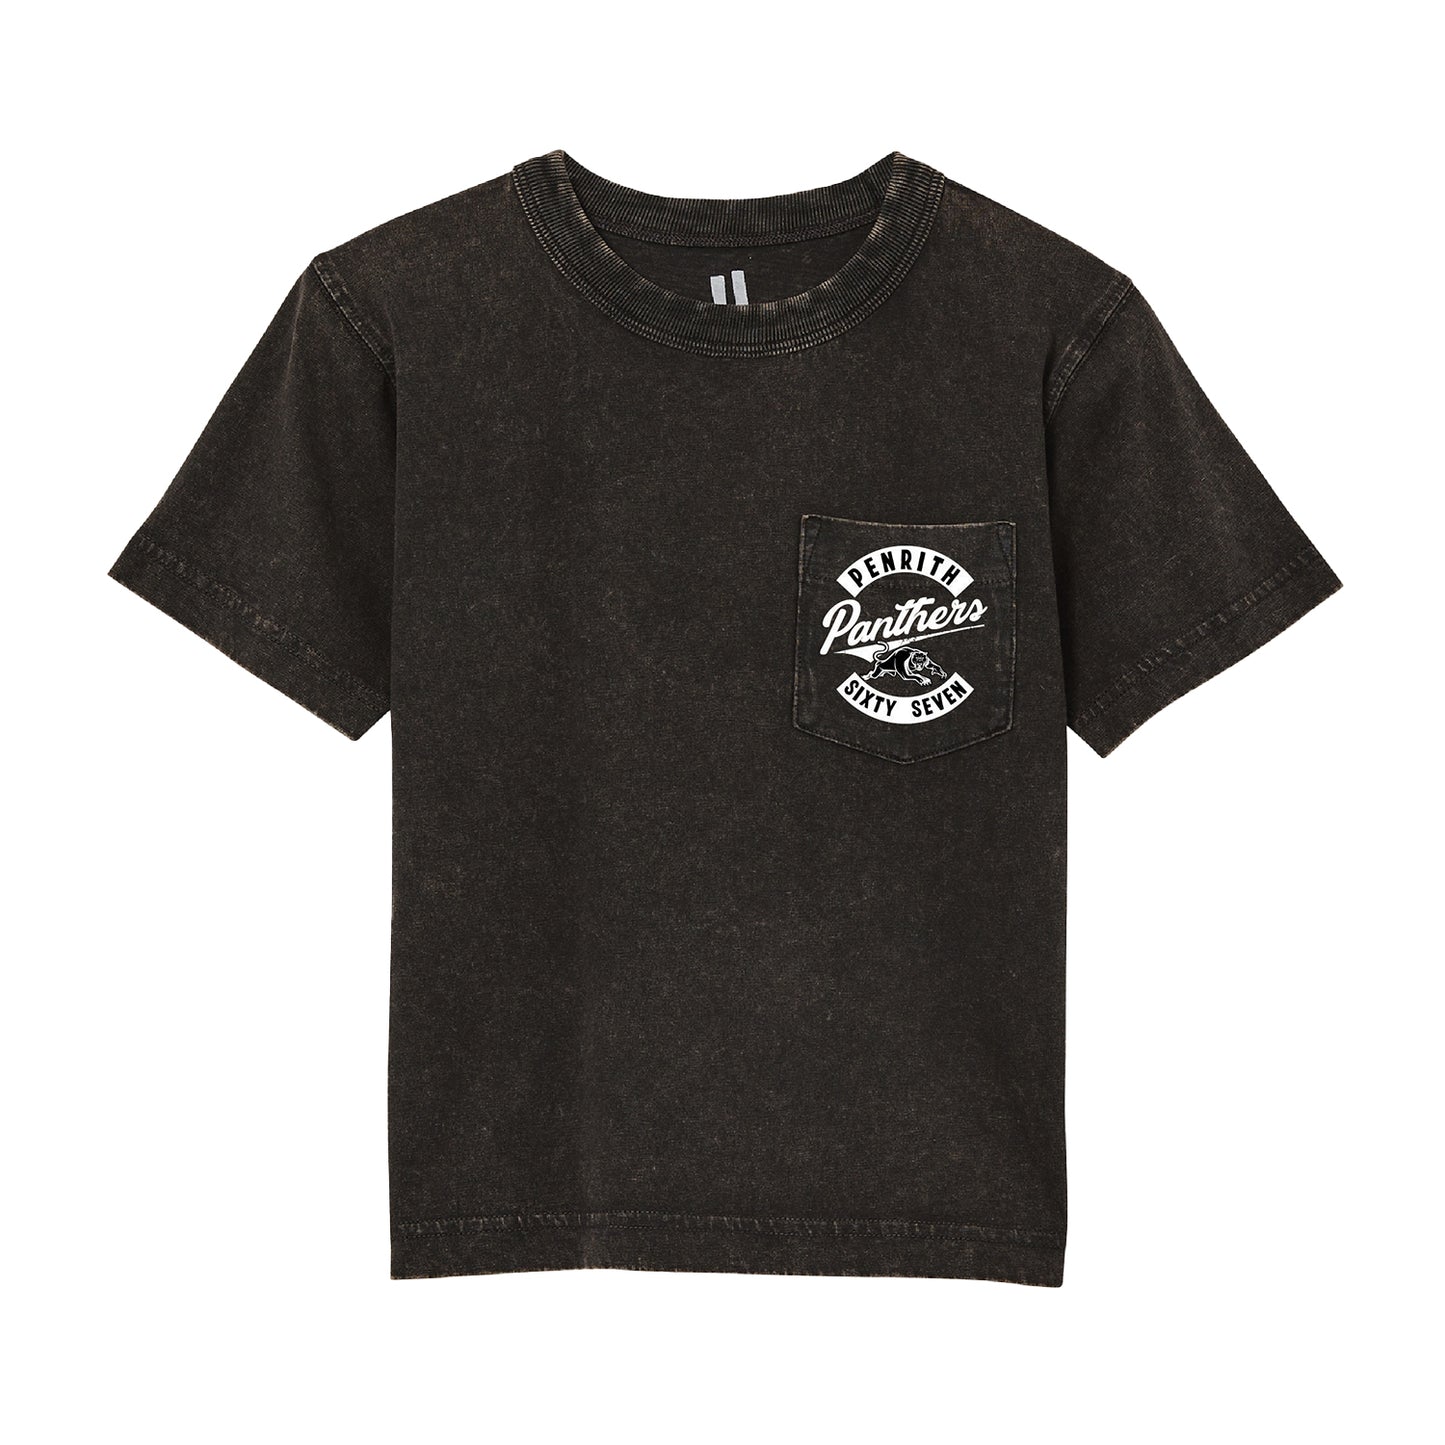 Penrith Panthers Youth Spinner Tee